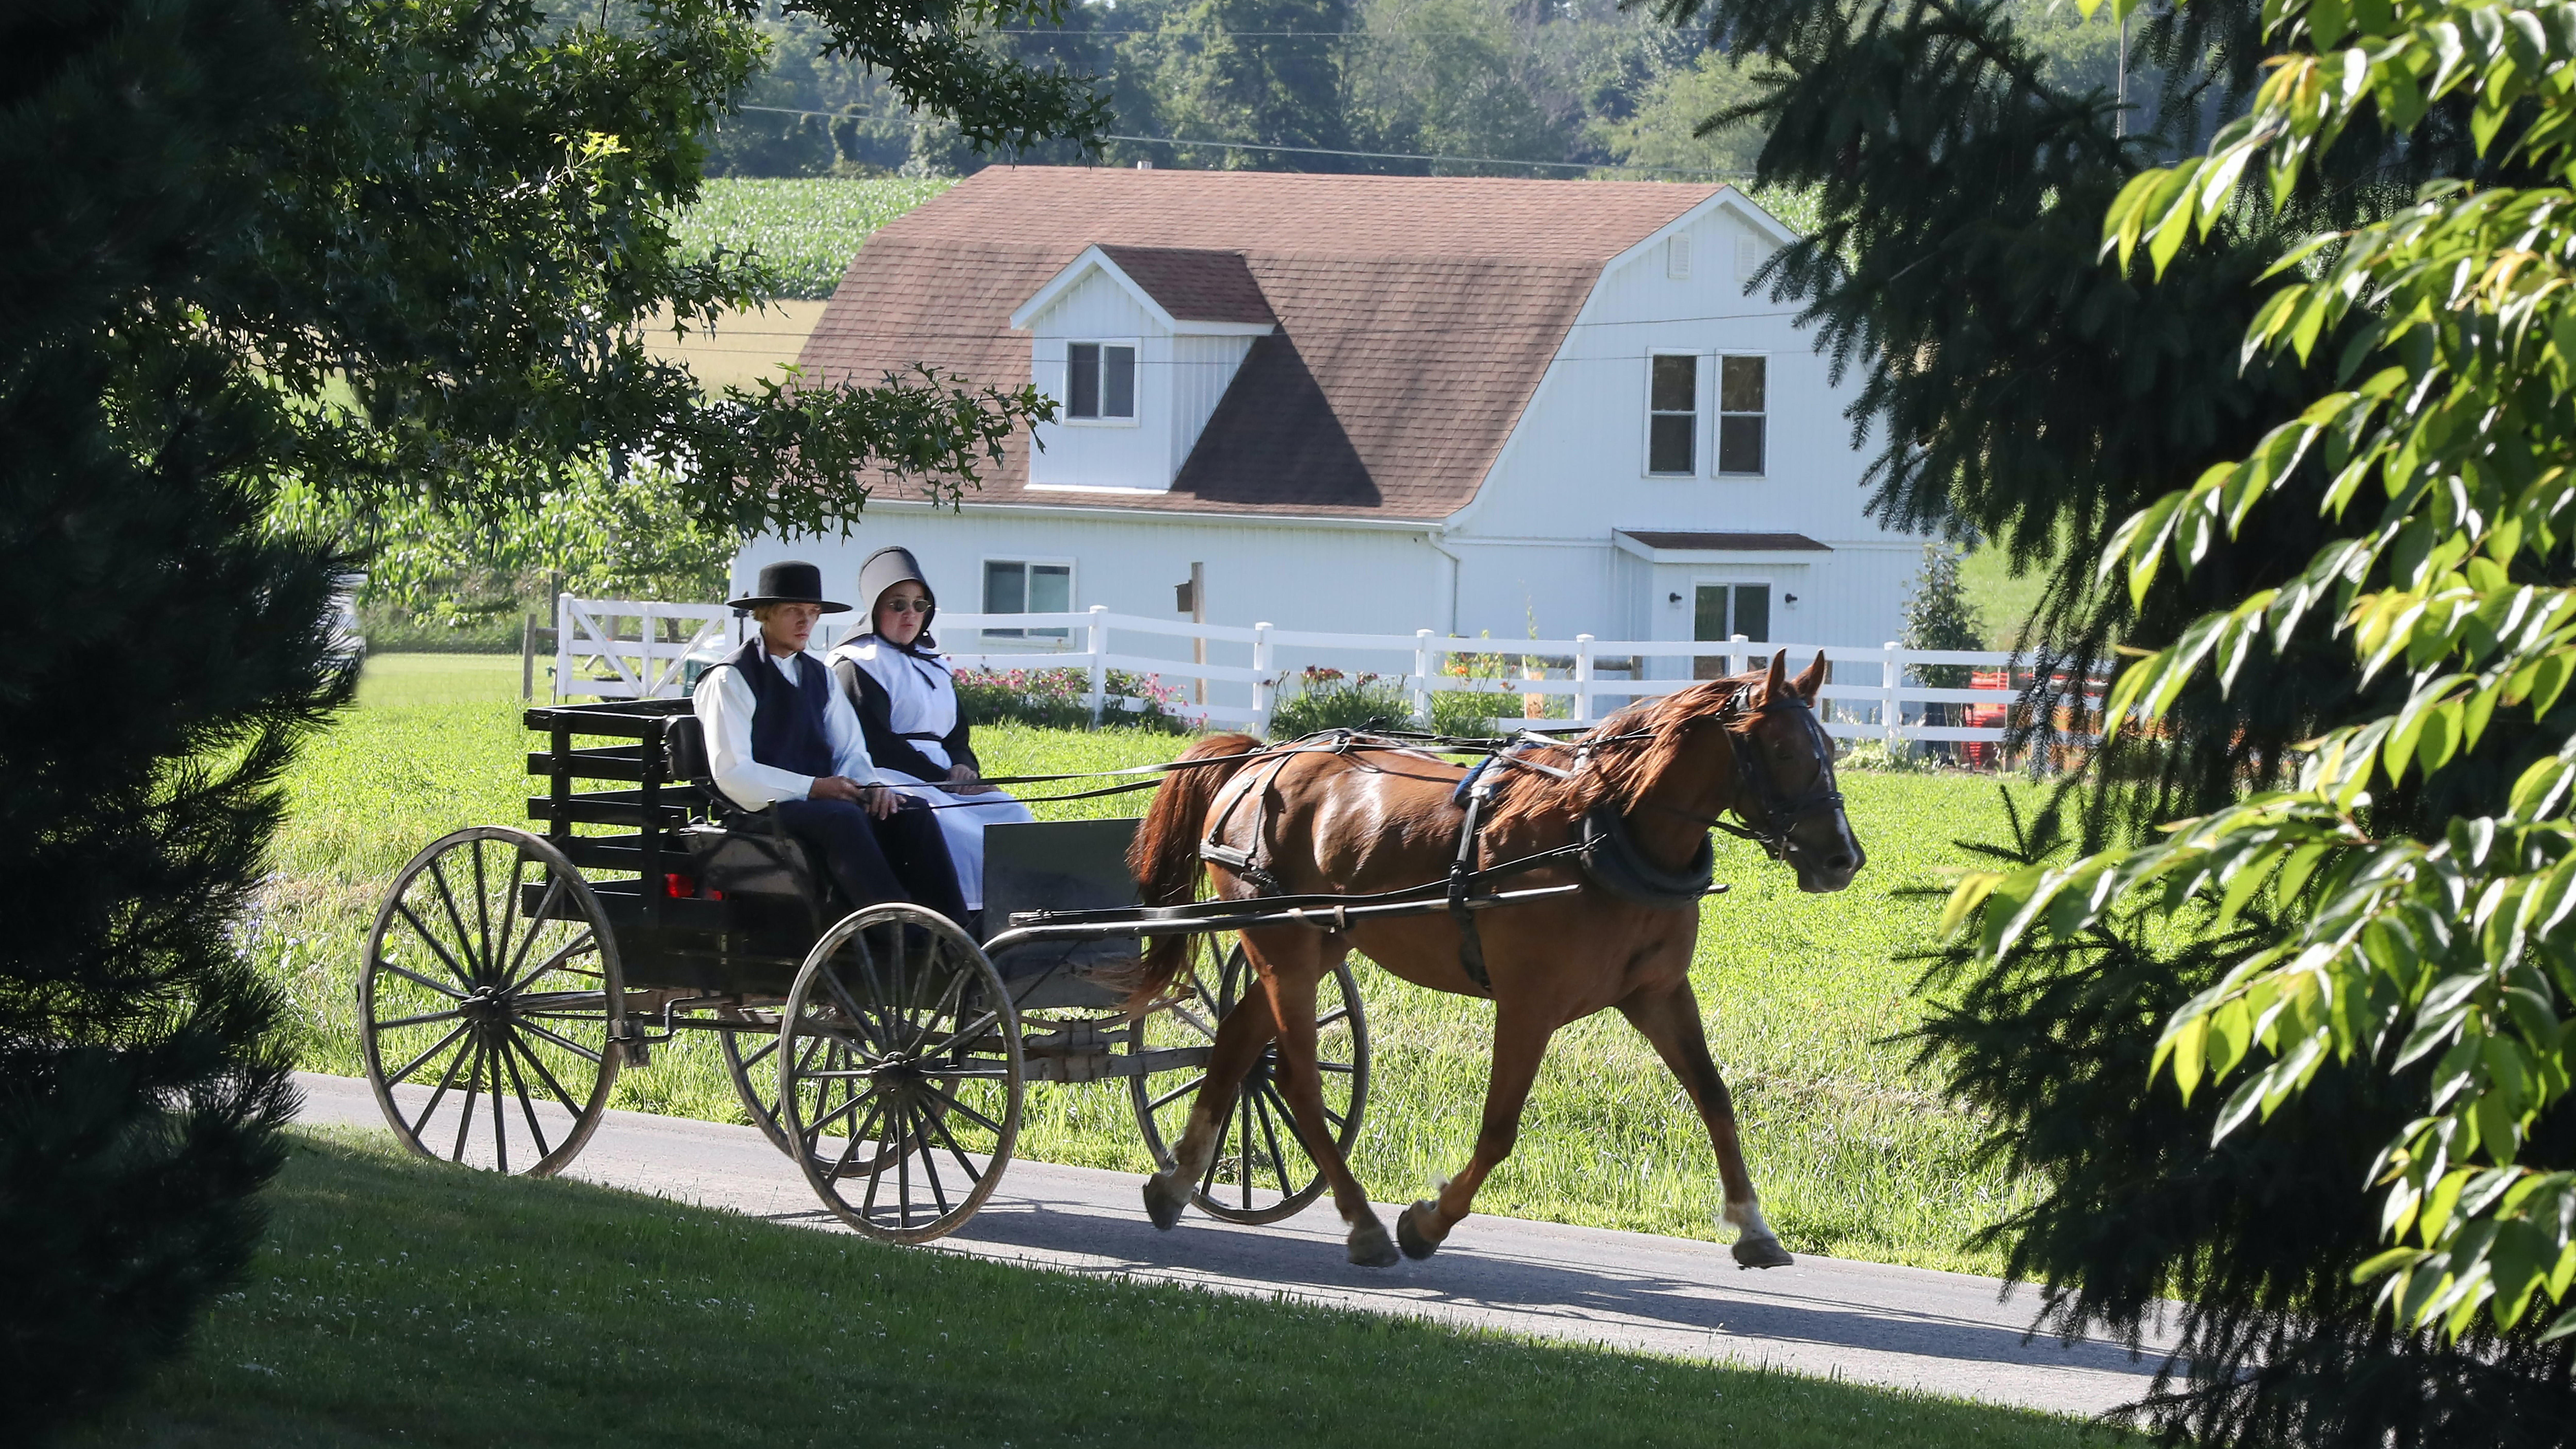 THE AMISH DILEMMA offers a rare immersion in one of the world’s most closed communities.